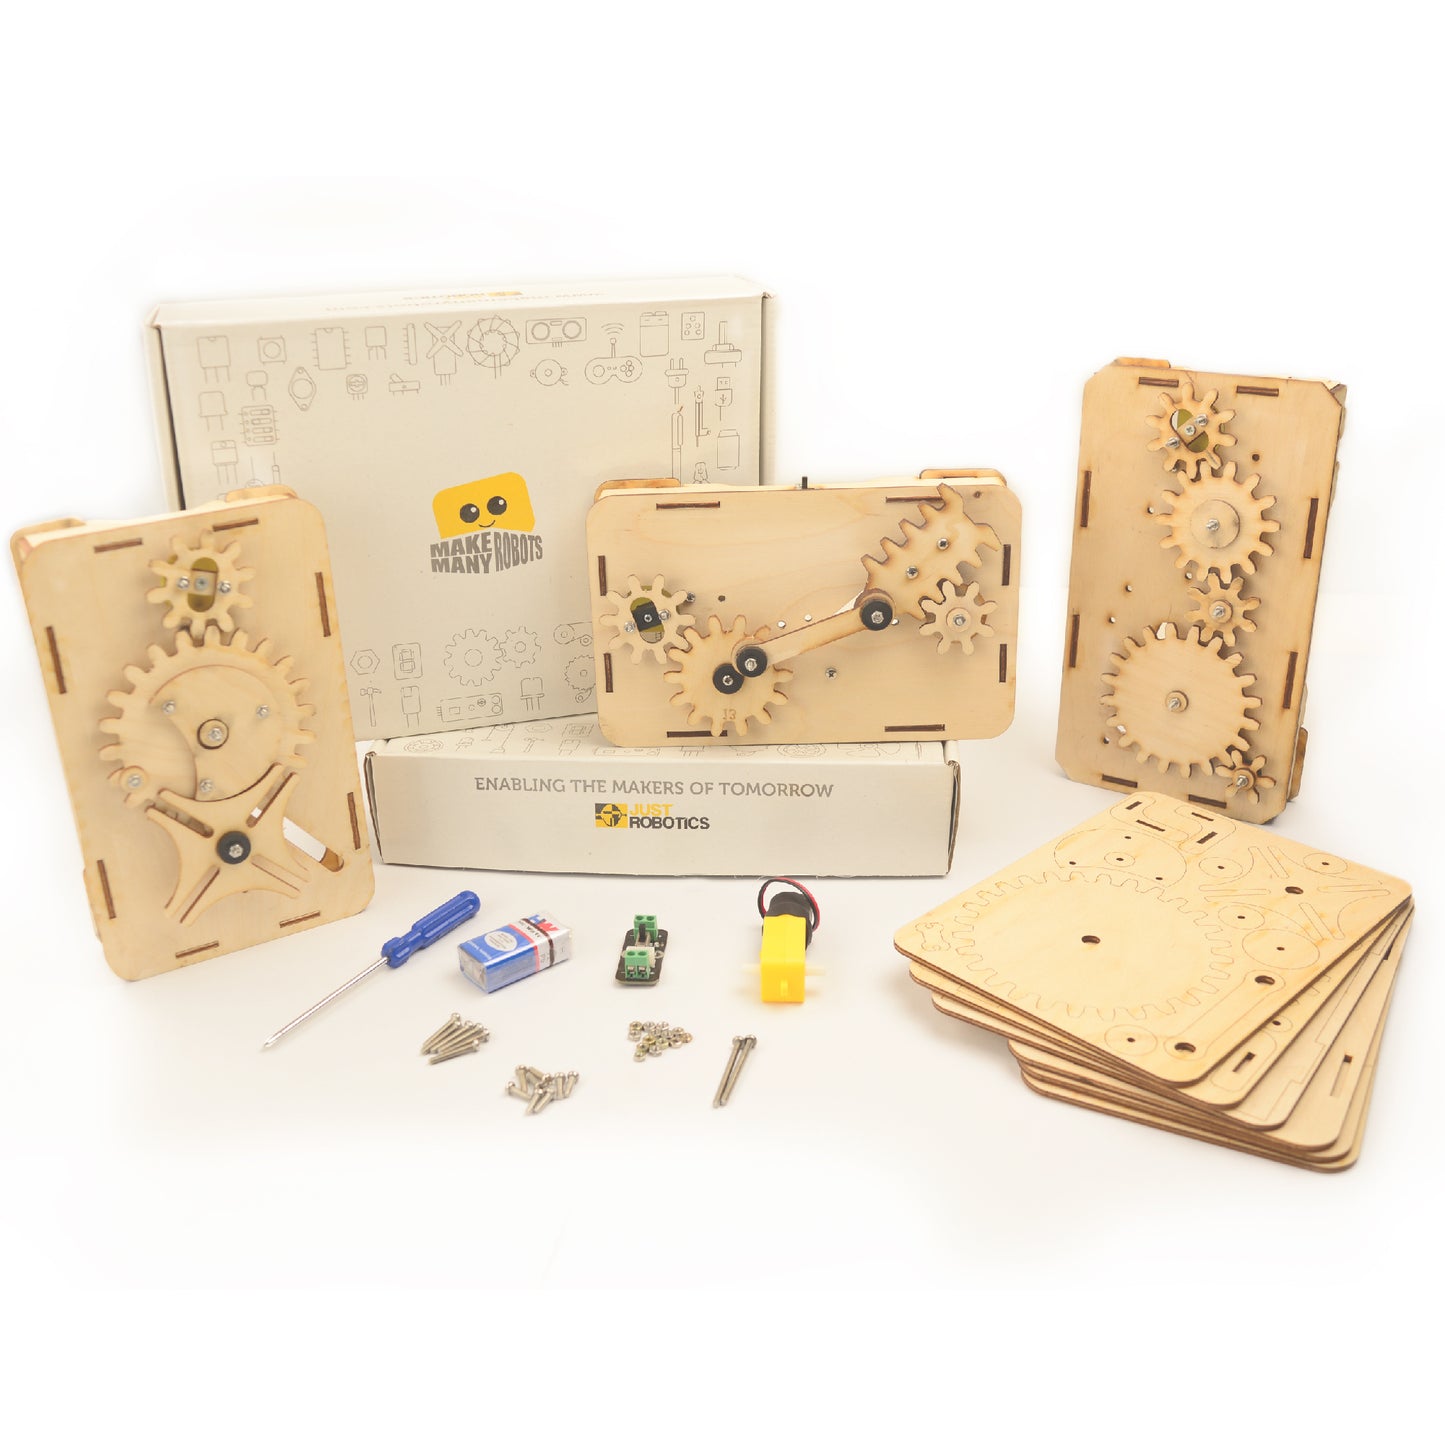 All About Gears - Build a Gear Box - Combo Kit